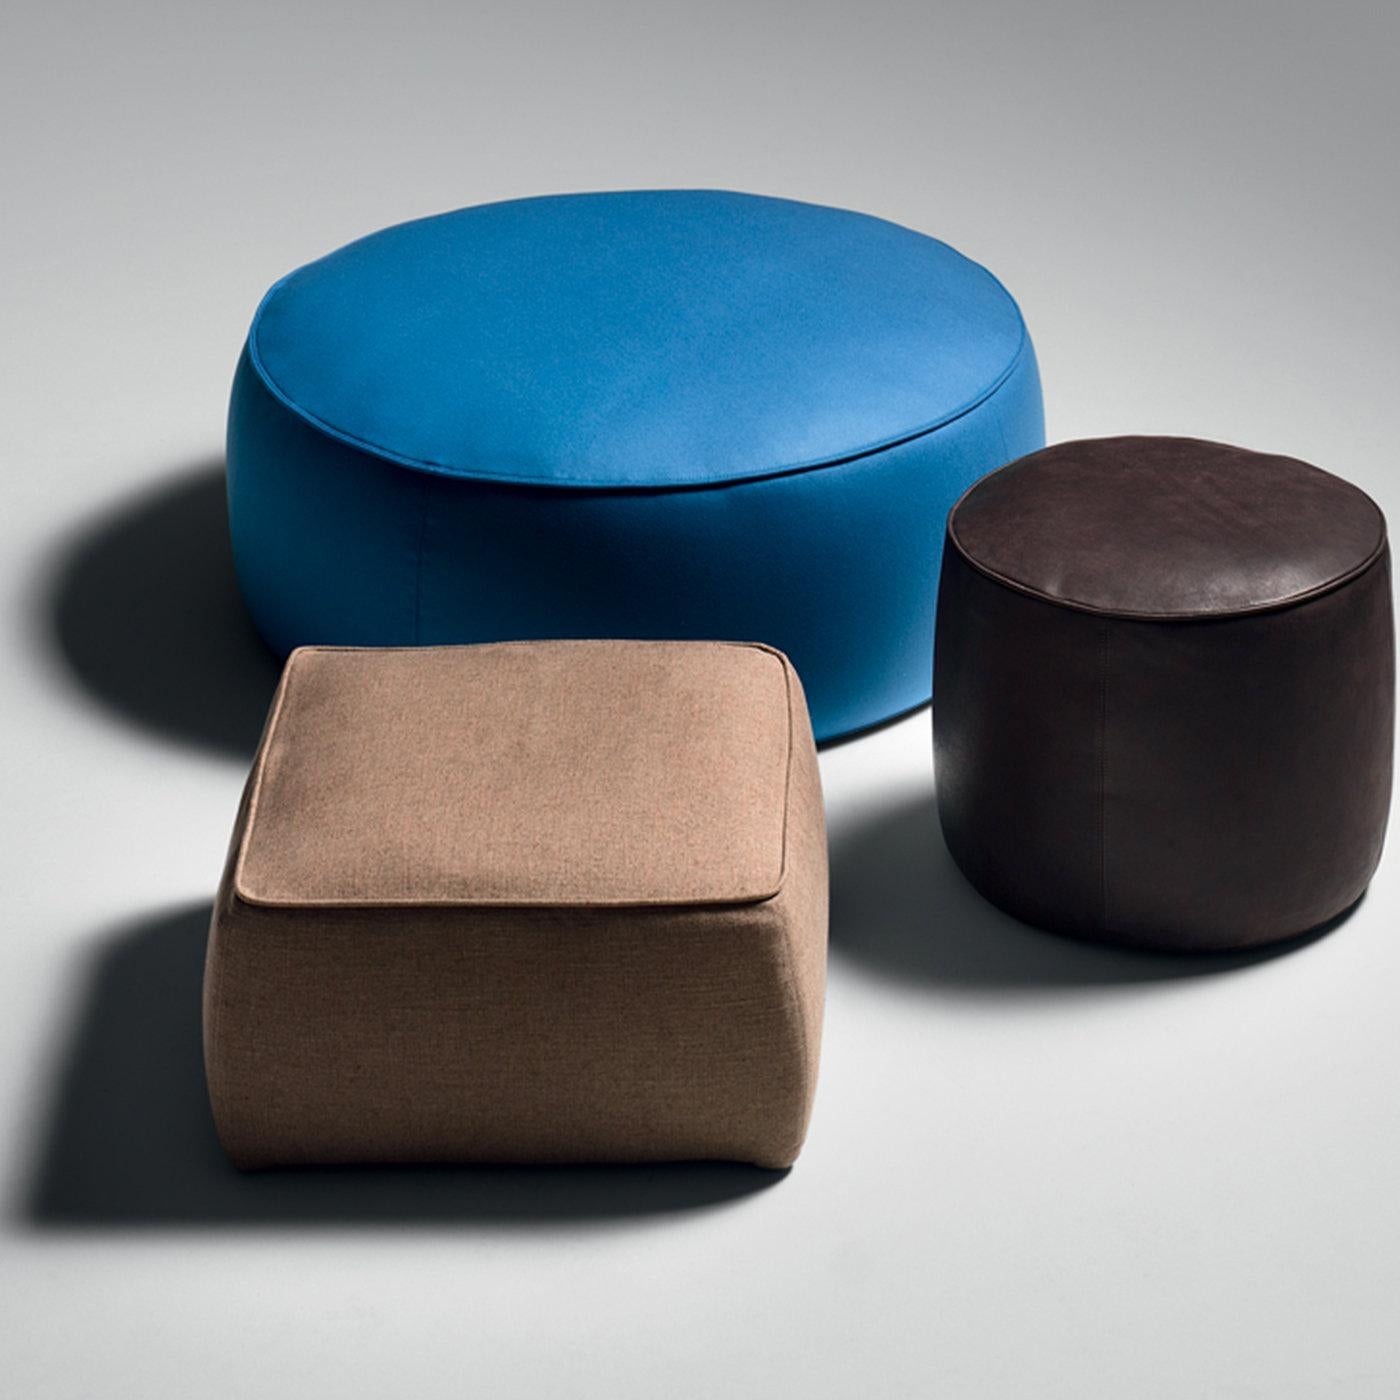 This pouf has a minimal enhanced by high-quality materials. It features a structure in poplar wood, padded of high-resistance and multi-density polyurethane and memory foam. Upholstered in non-removable brown leather, the top is filled with 100%